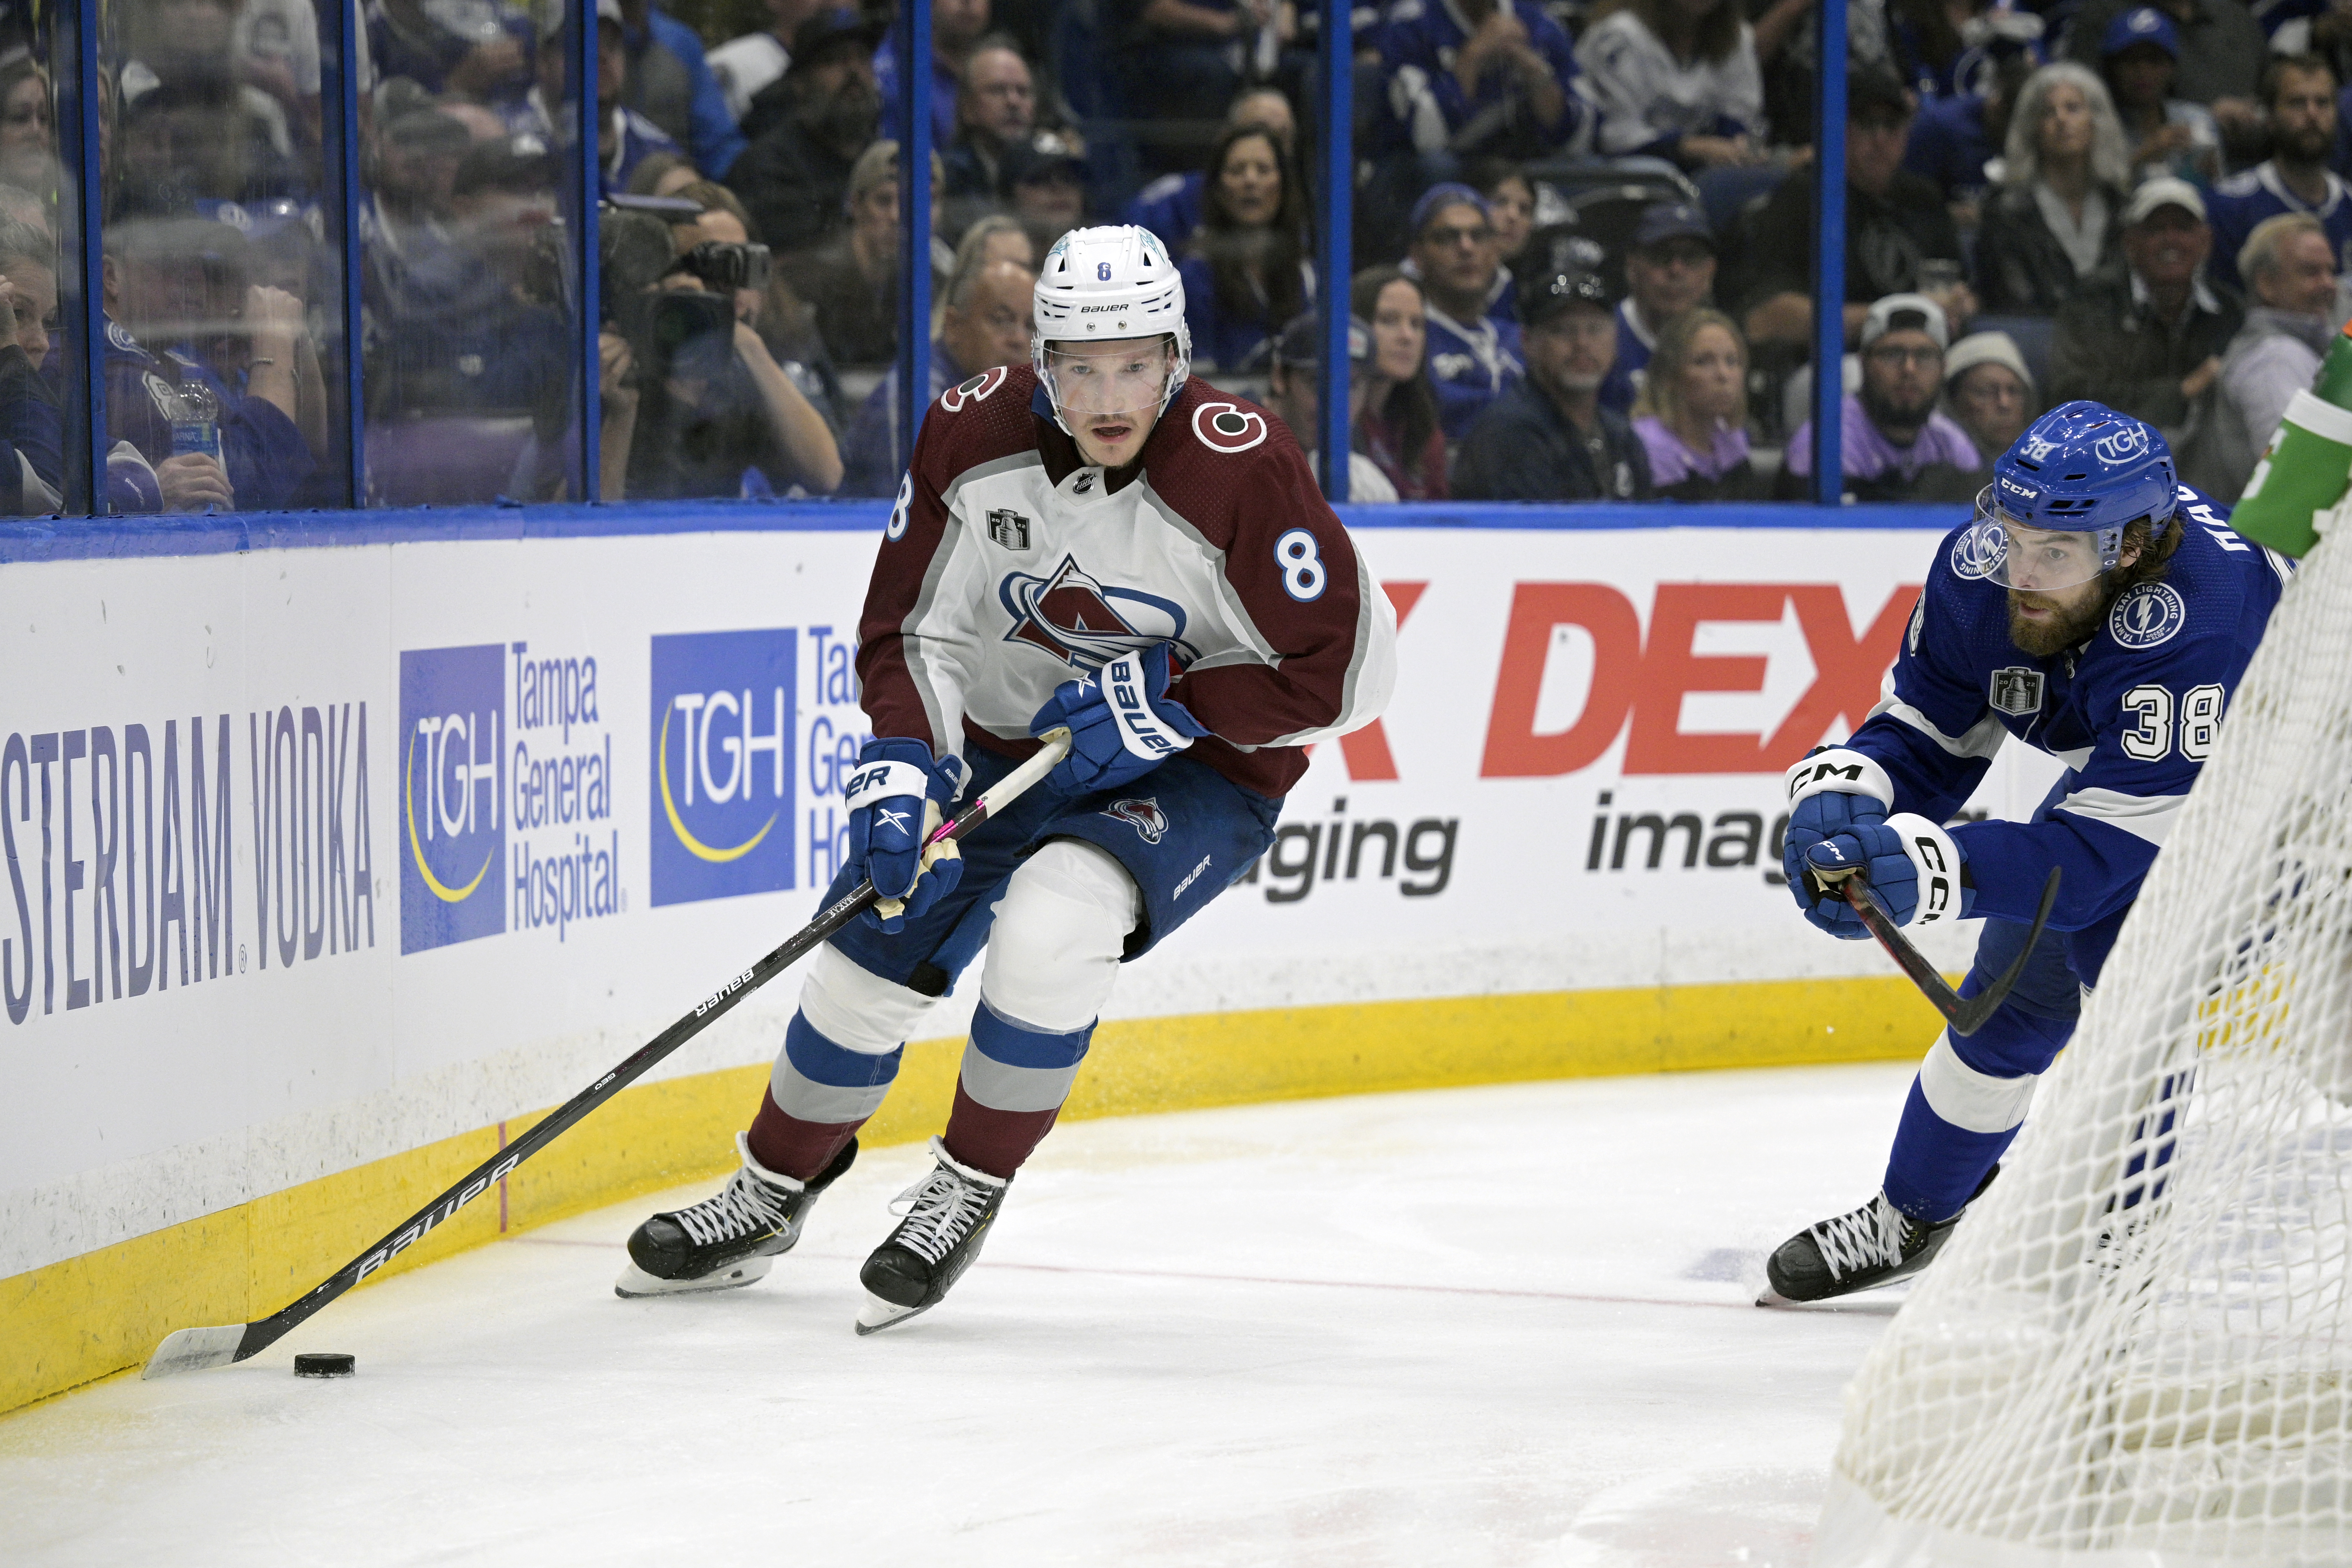 Can Cale Makar really contend for the Norris Trophy this season